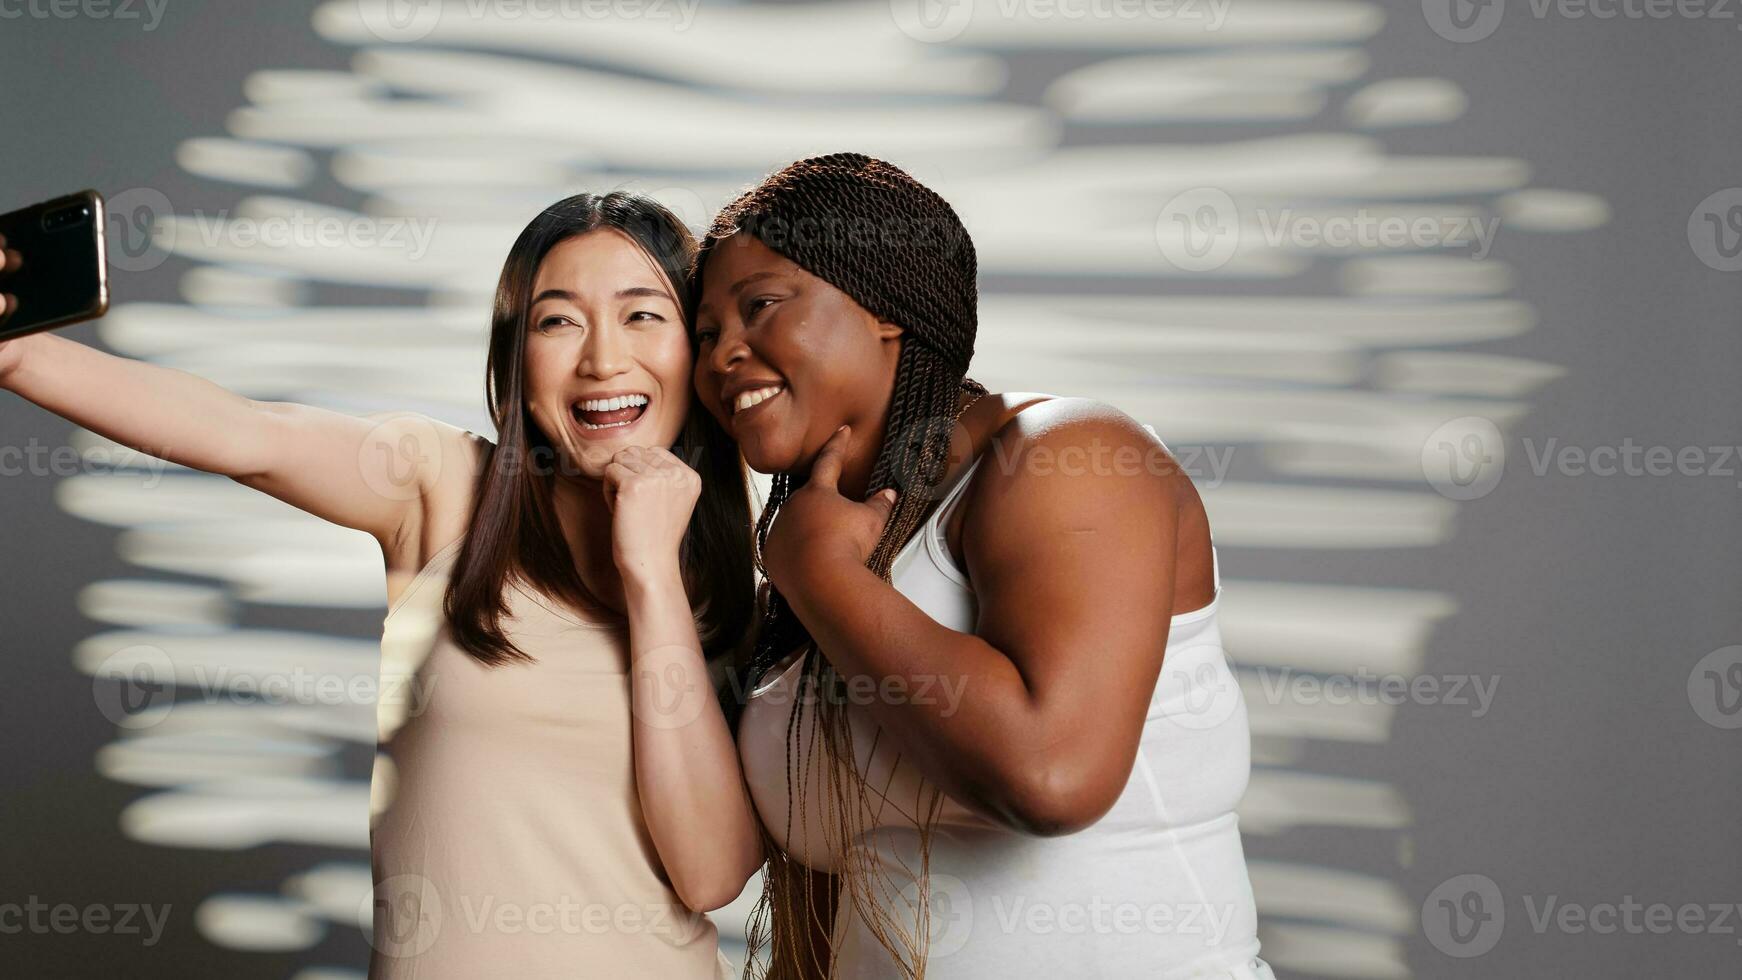 Two skincare models taking pictures on smartphone, using mobile phone to have fun with photos. Young beautiful women promoting self love and body positivity, self acceptance in studio. photo